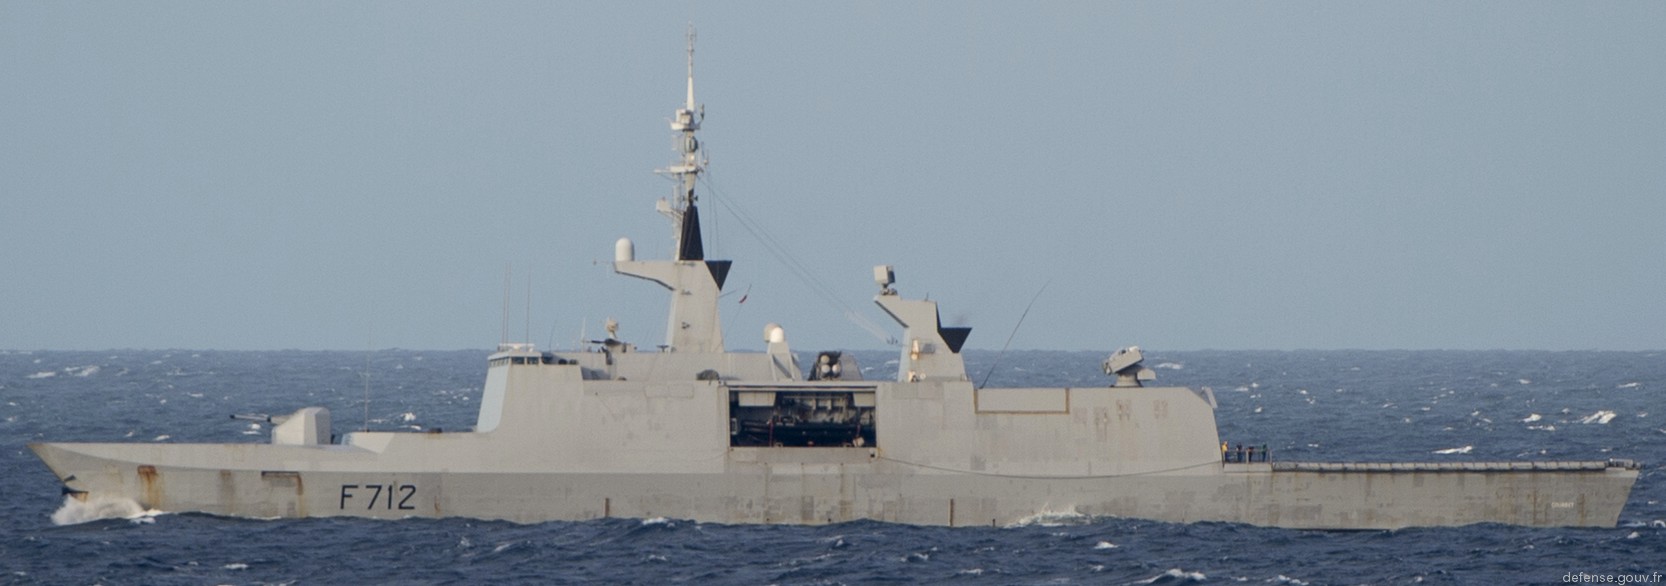 f-712 fs courbet la fayette class frigate french navy marine nationale 35